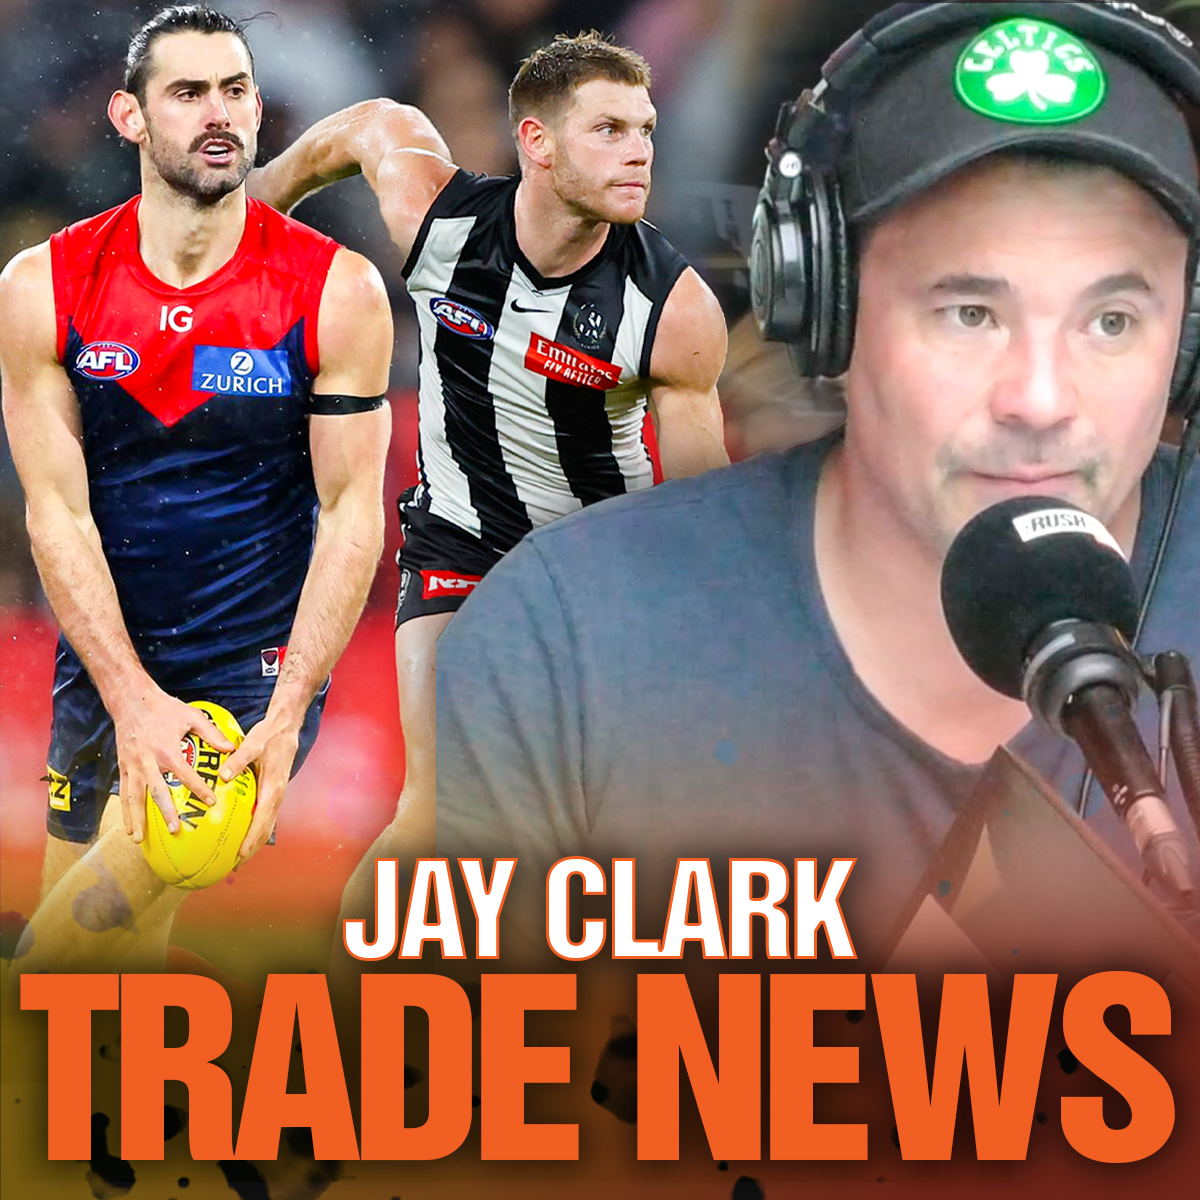 Jay Clark's Trade Wrap | Adams, Grundy, Fisher, Stephens all find new homes